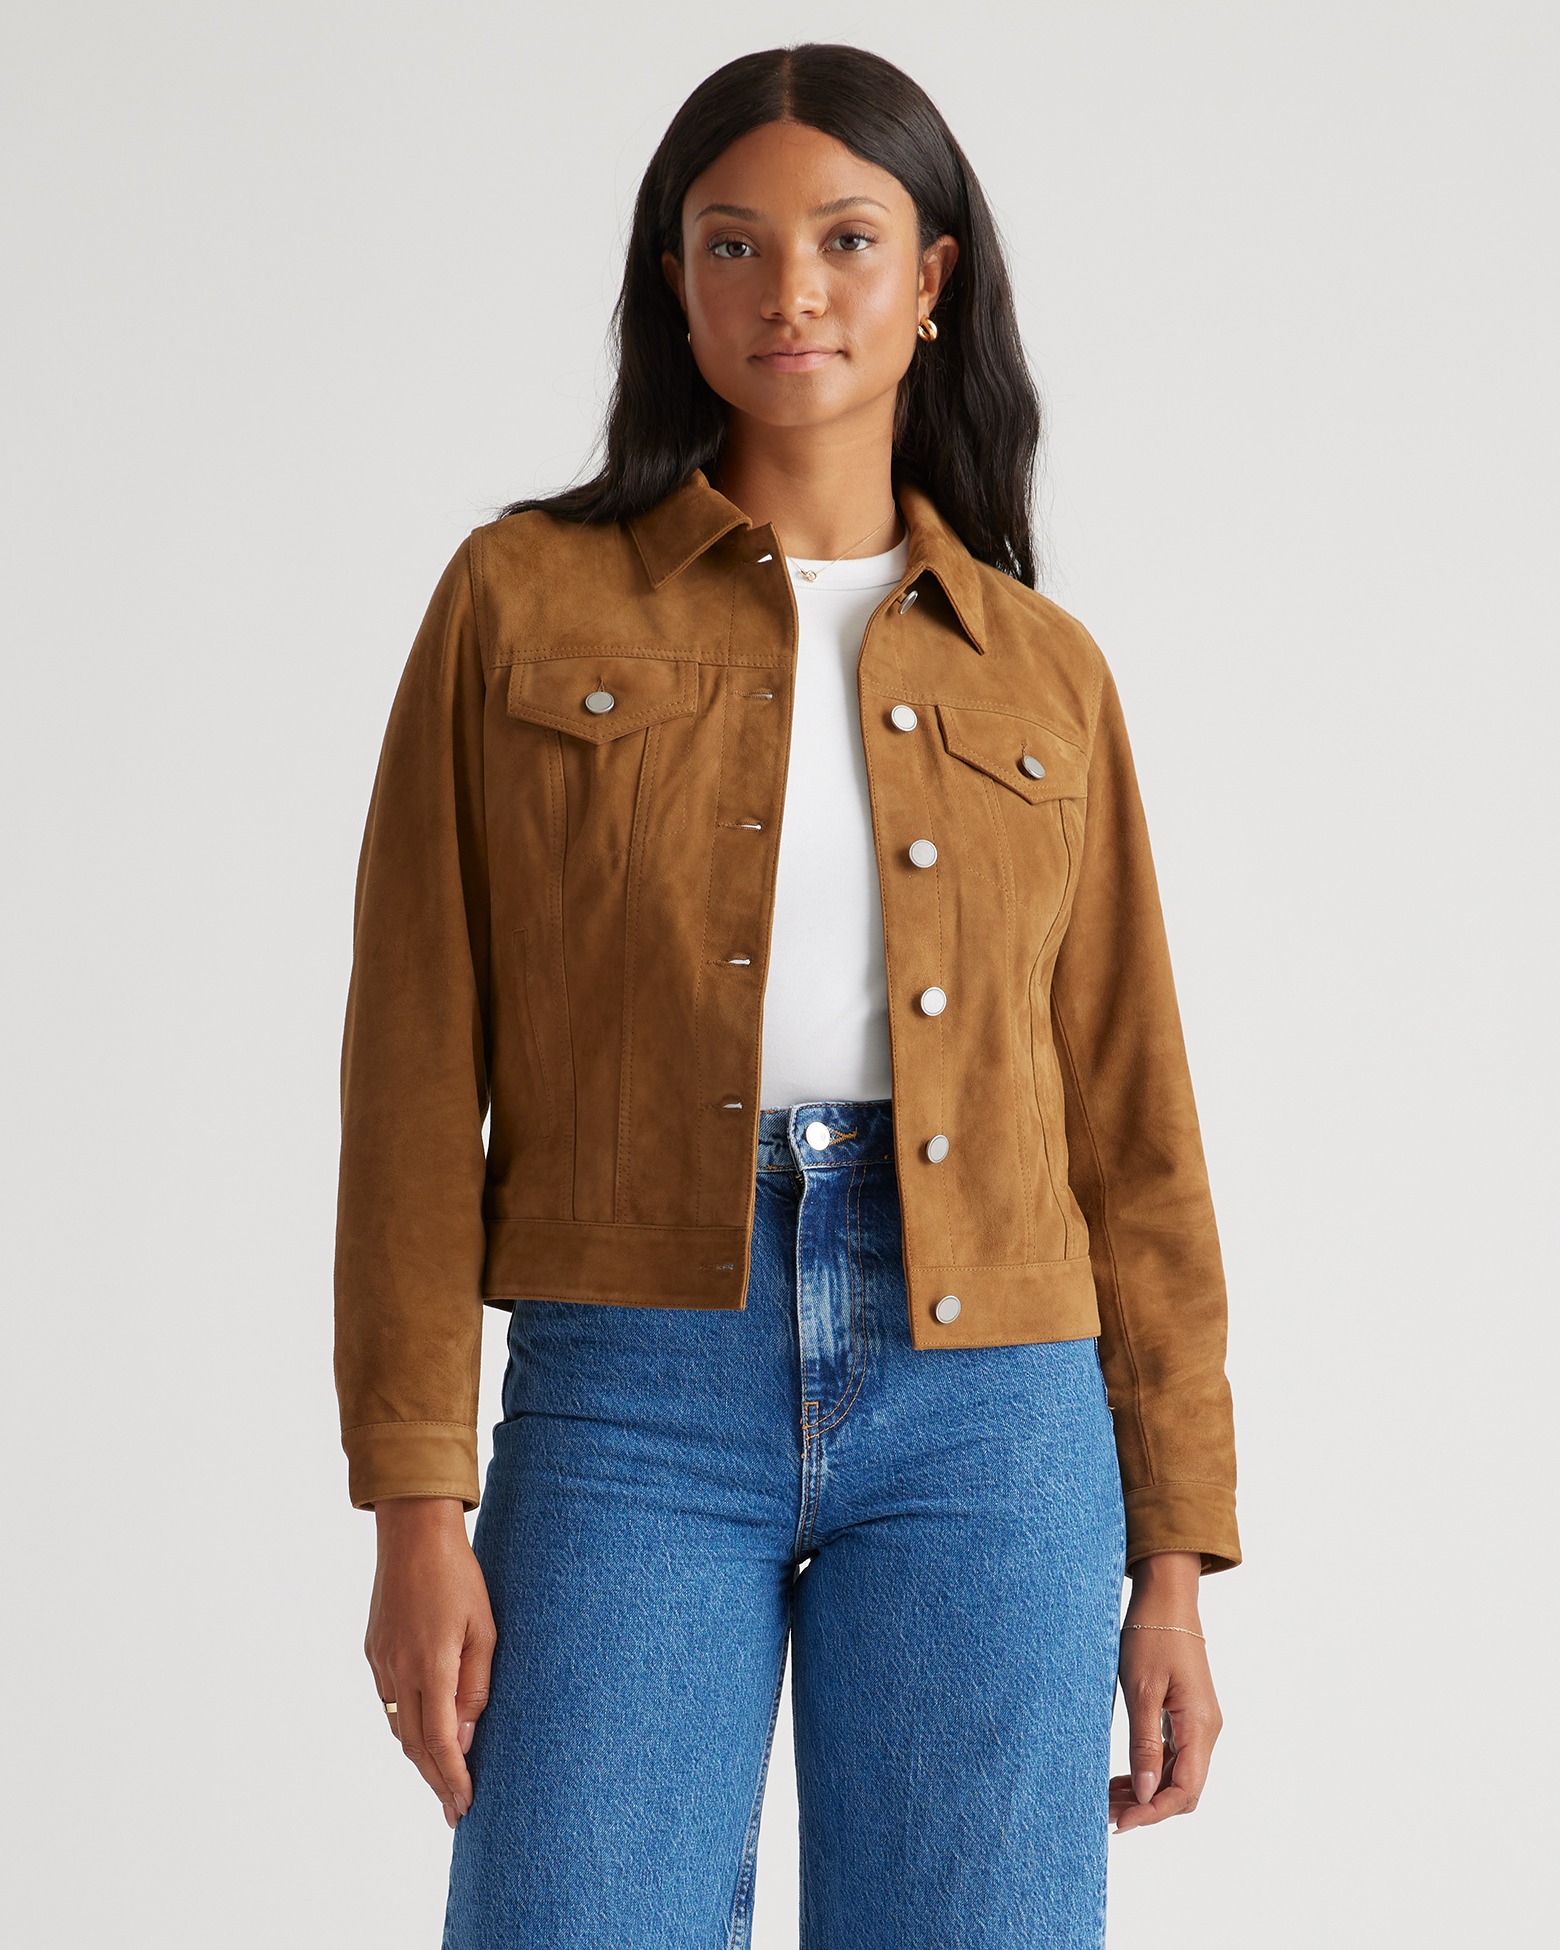 Brown Suede Trucker Jacket with Gingham Shirt